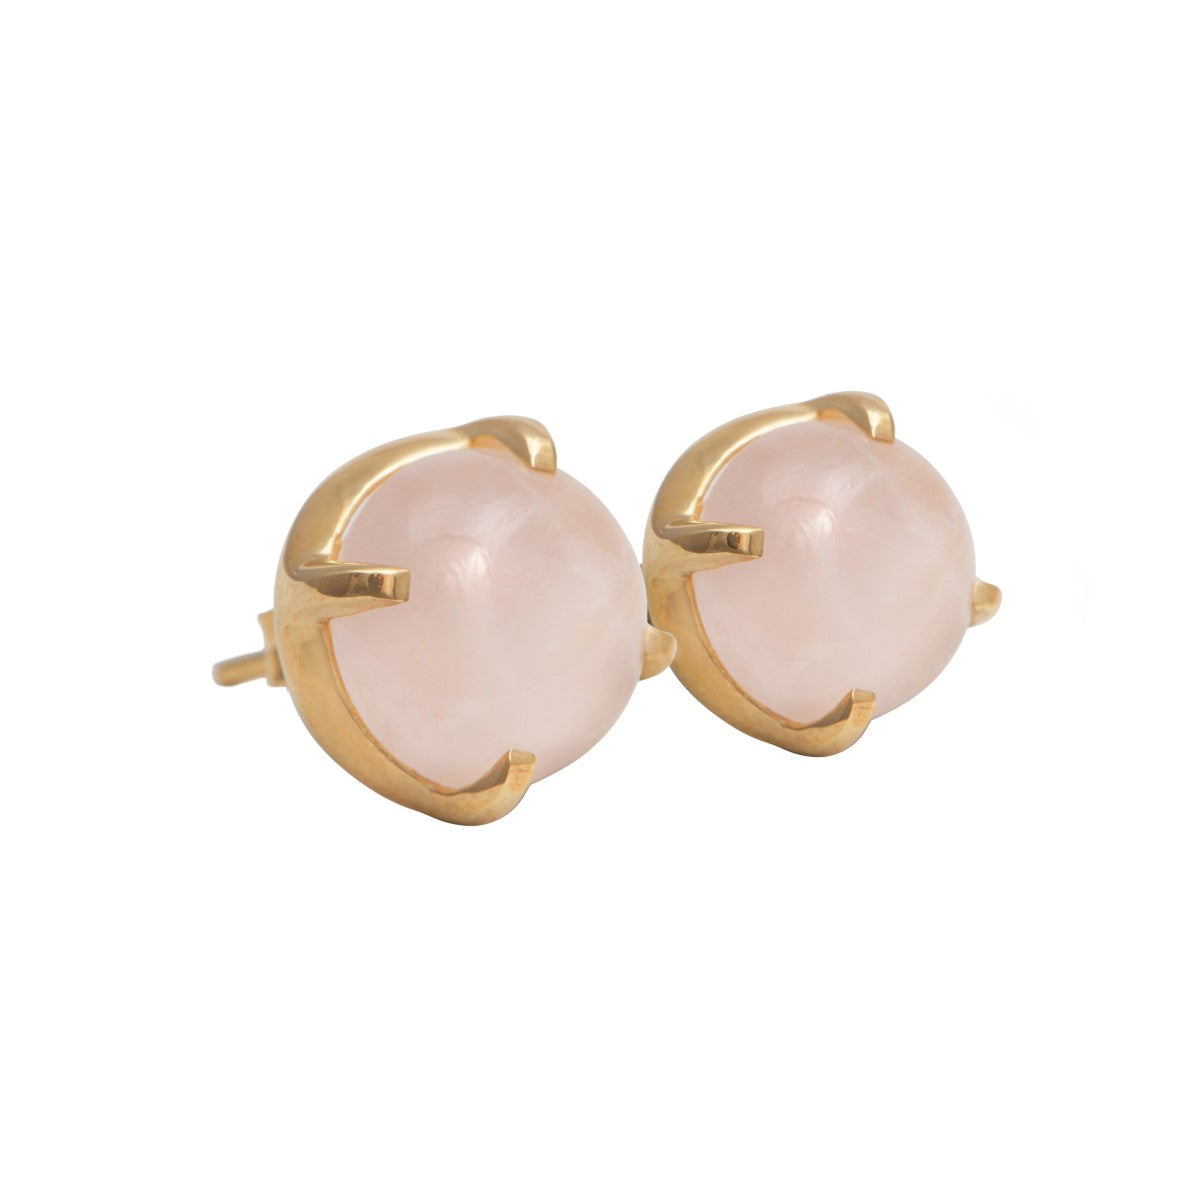 Round Cabochon Rose Quartz Stud Earrings in Gold Plated Sterling Silver